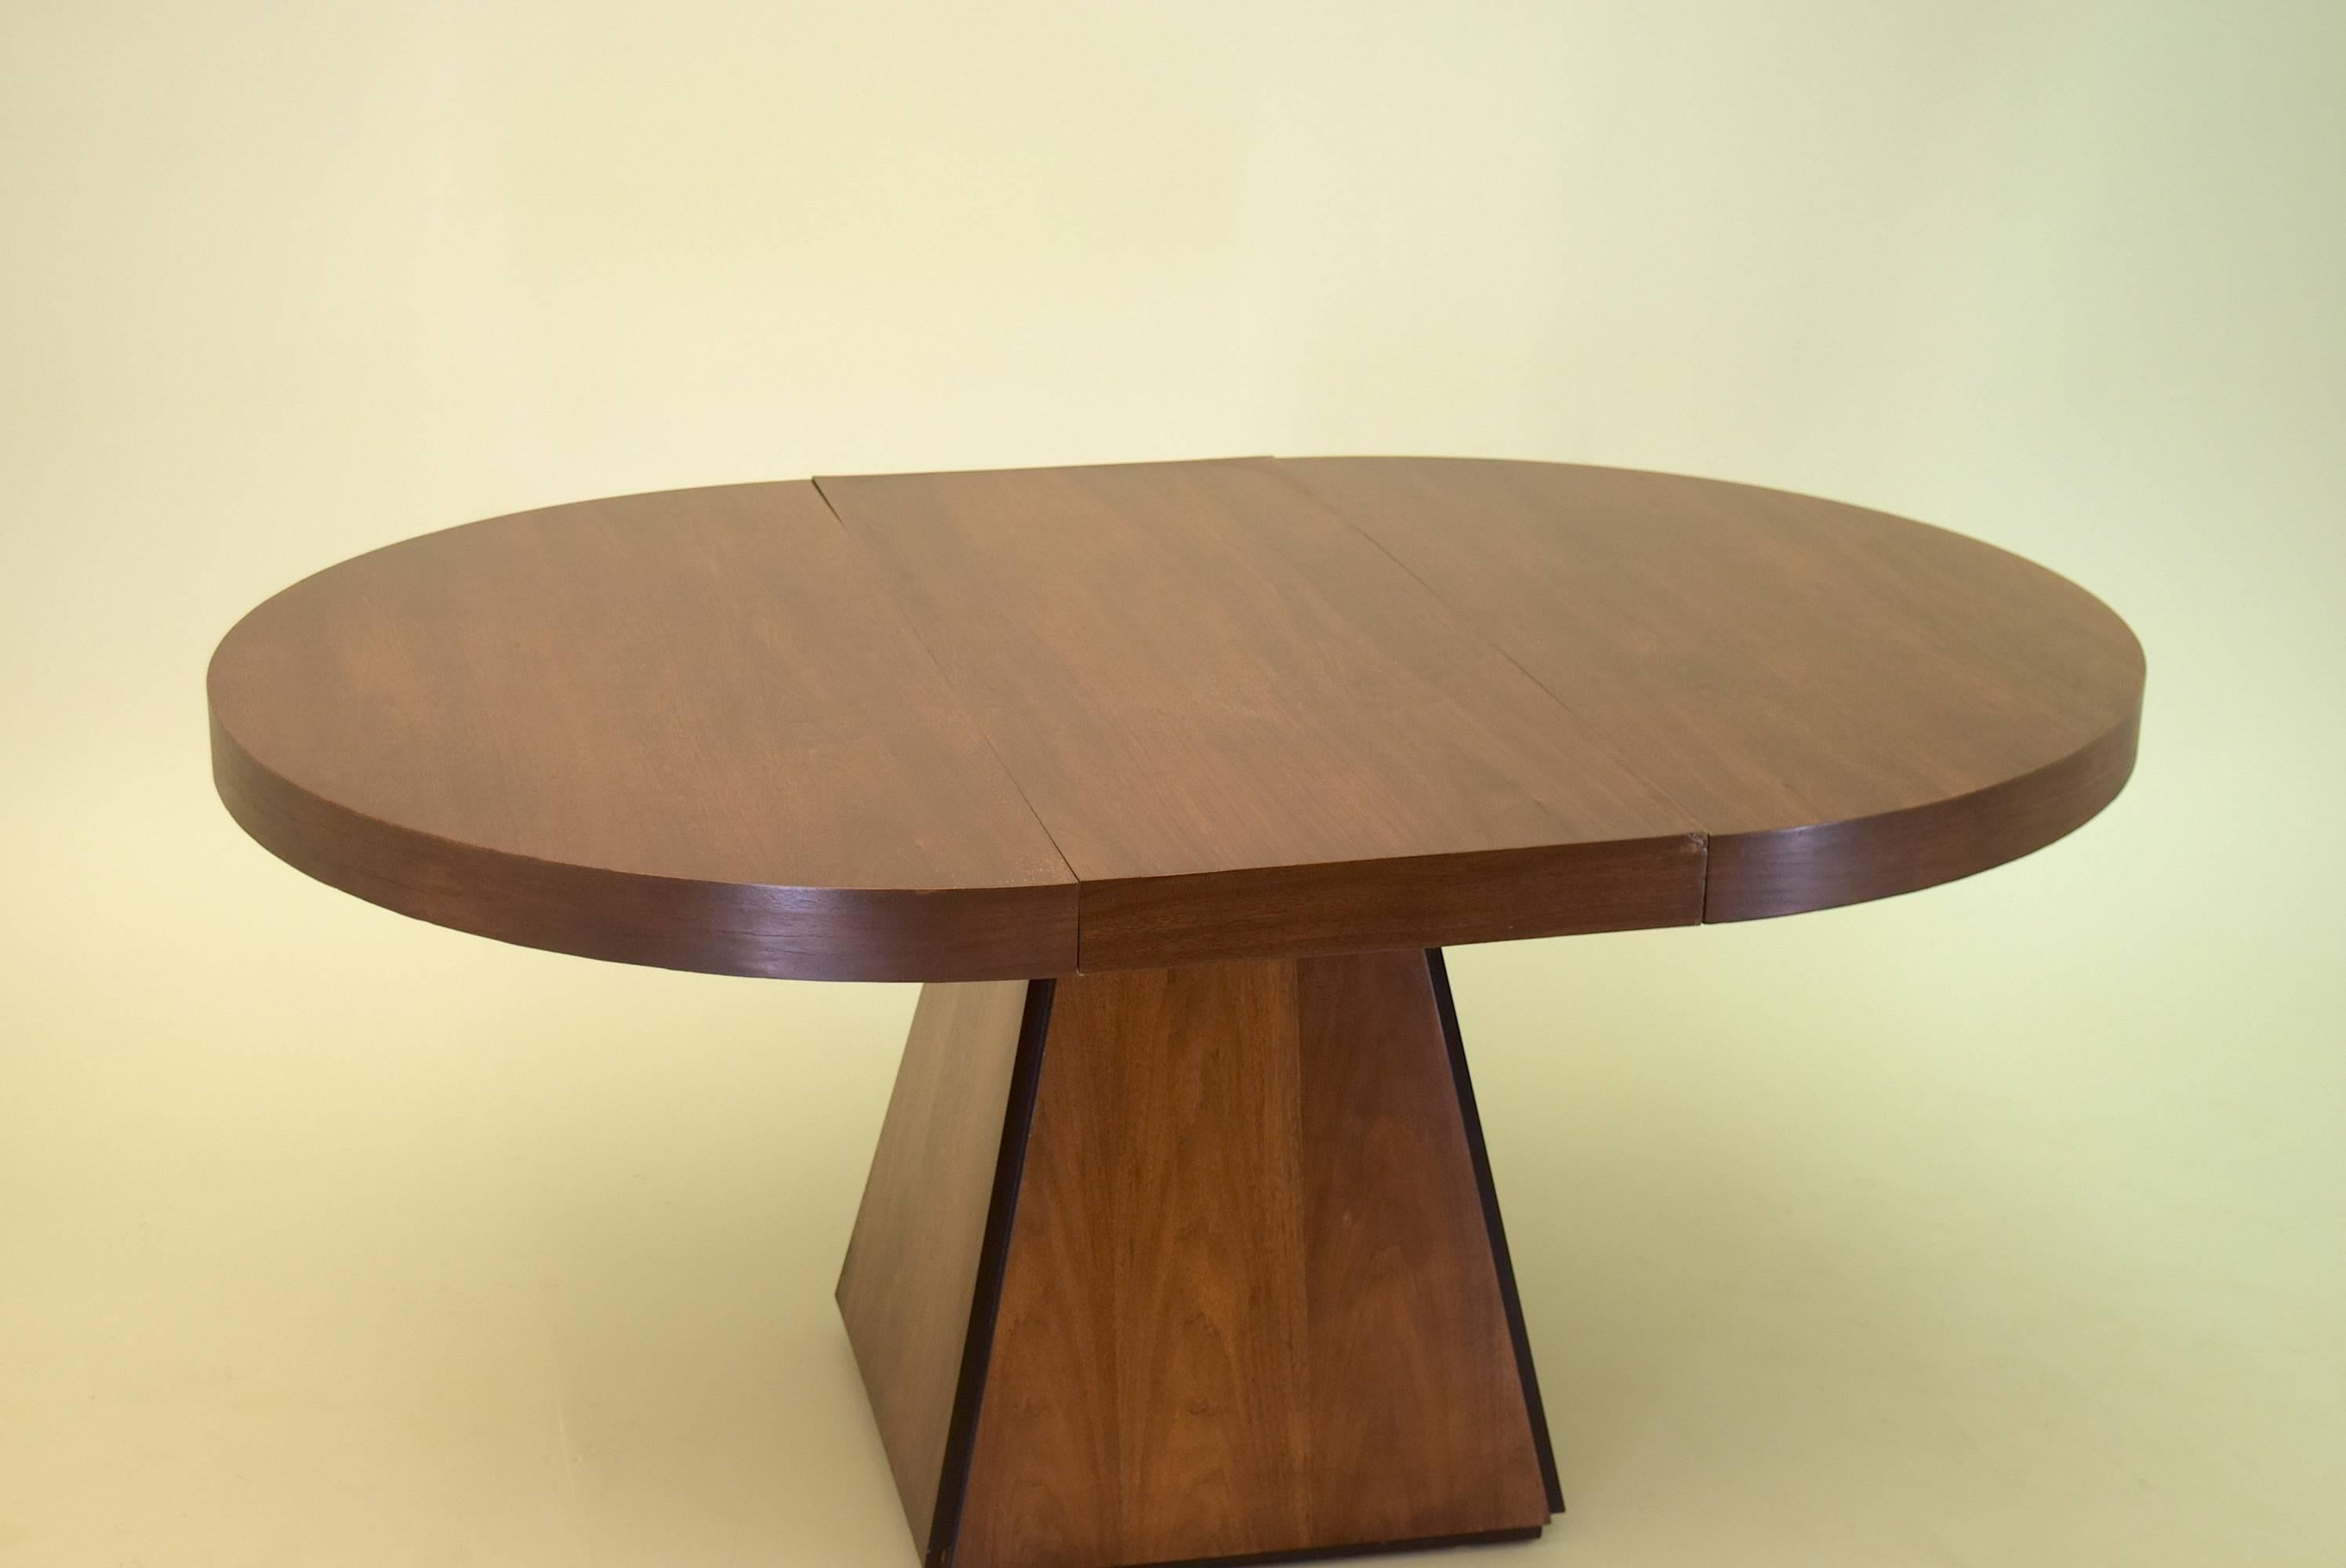 Other Pierre Cardin Round Obelisk Dining Table in Walnut with Extension Leaf